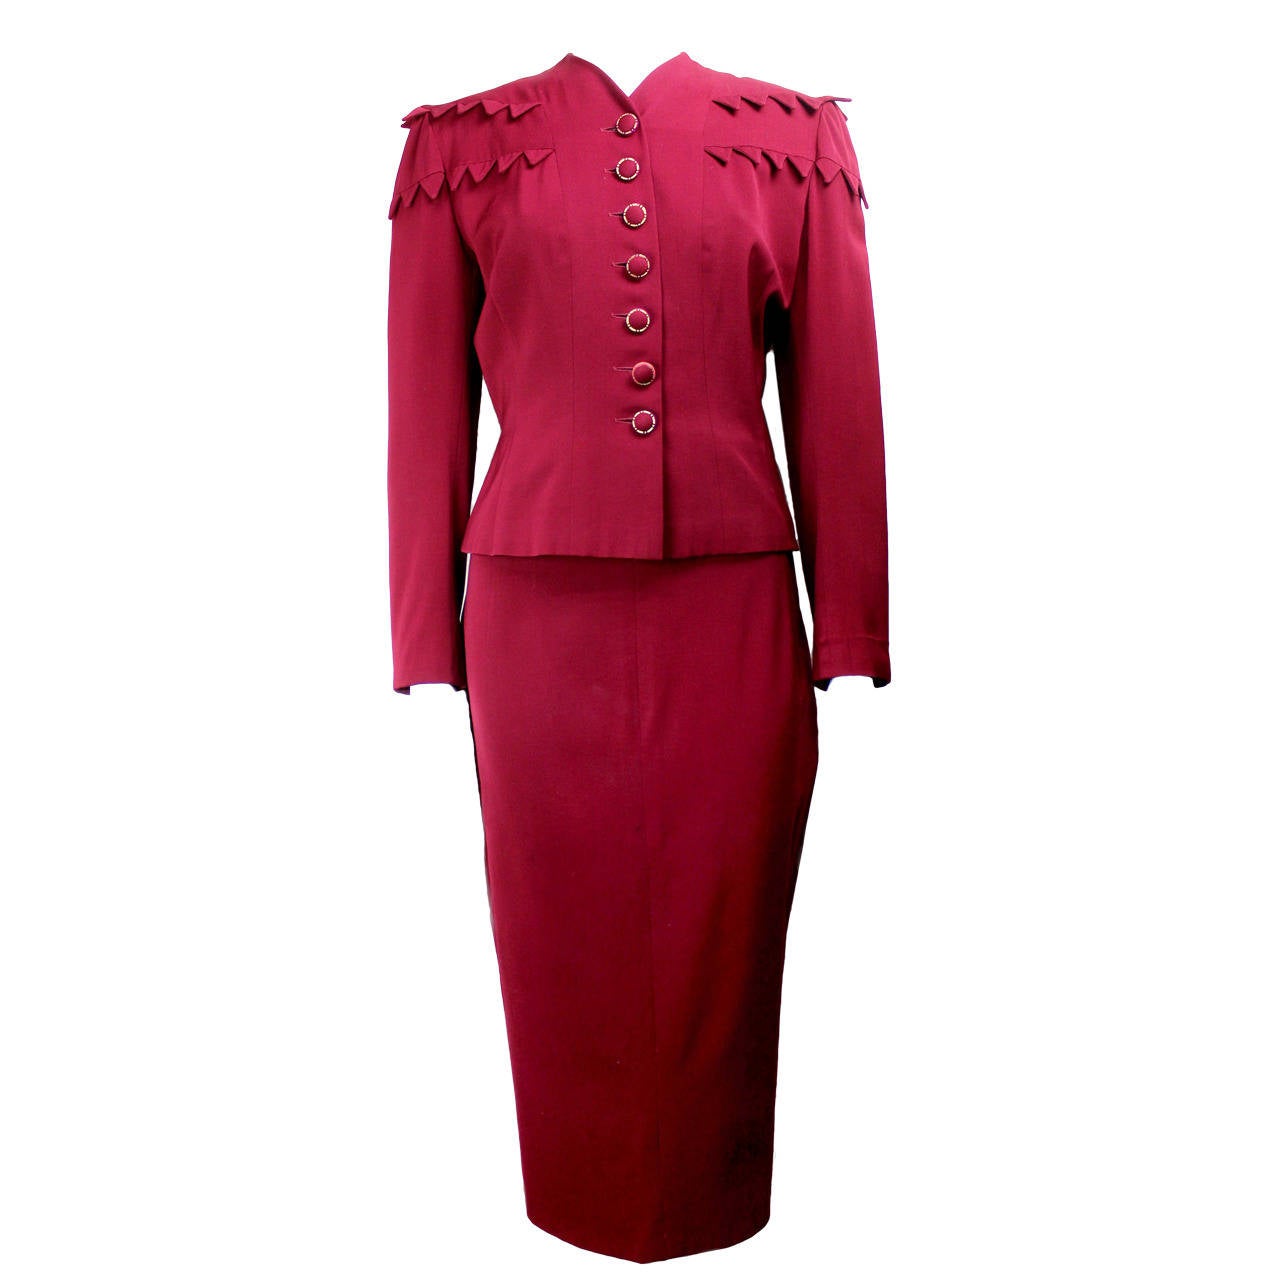 1940s Womens Suit with Unique Chevron-Shaped Details at 1stdibs